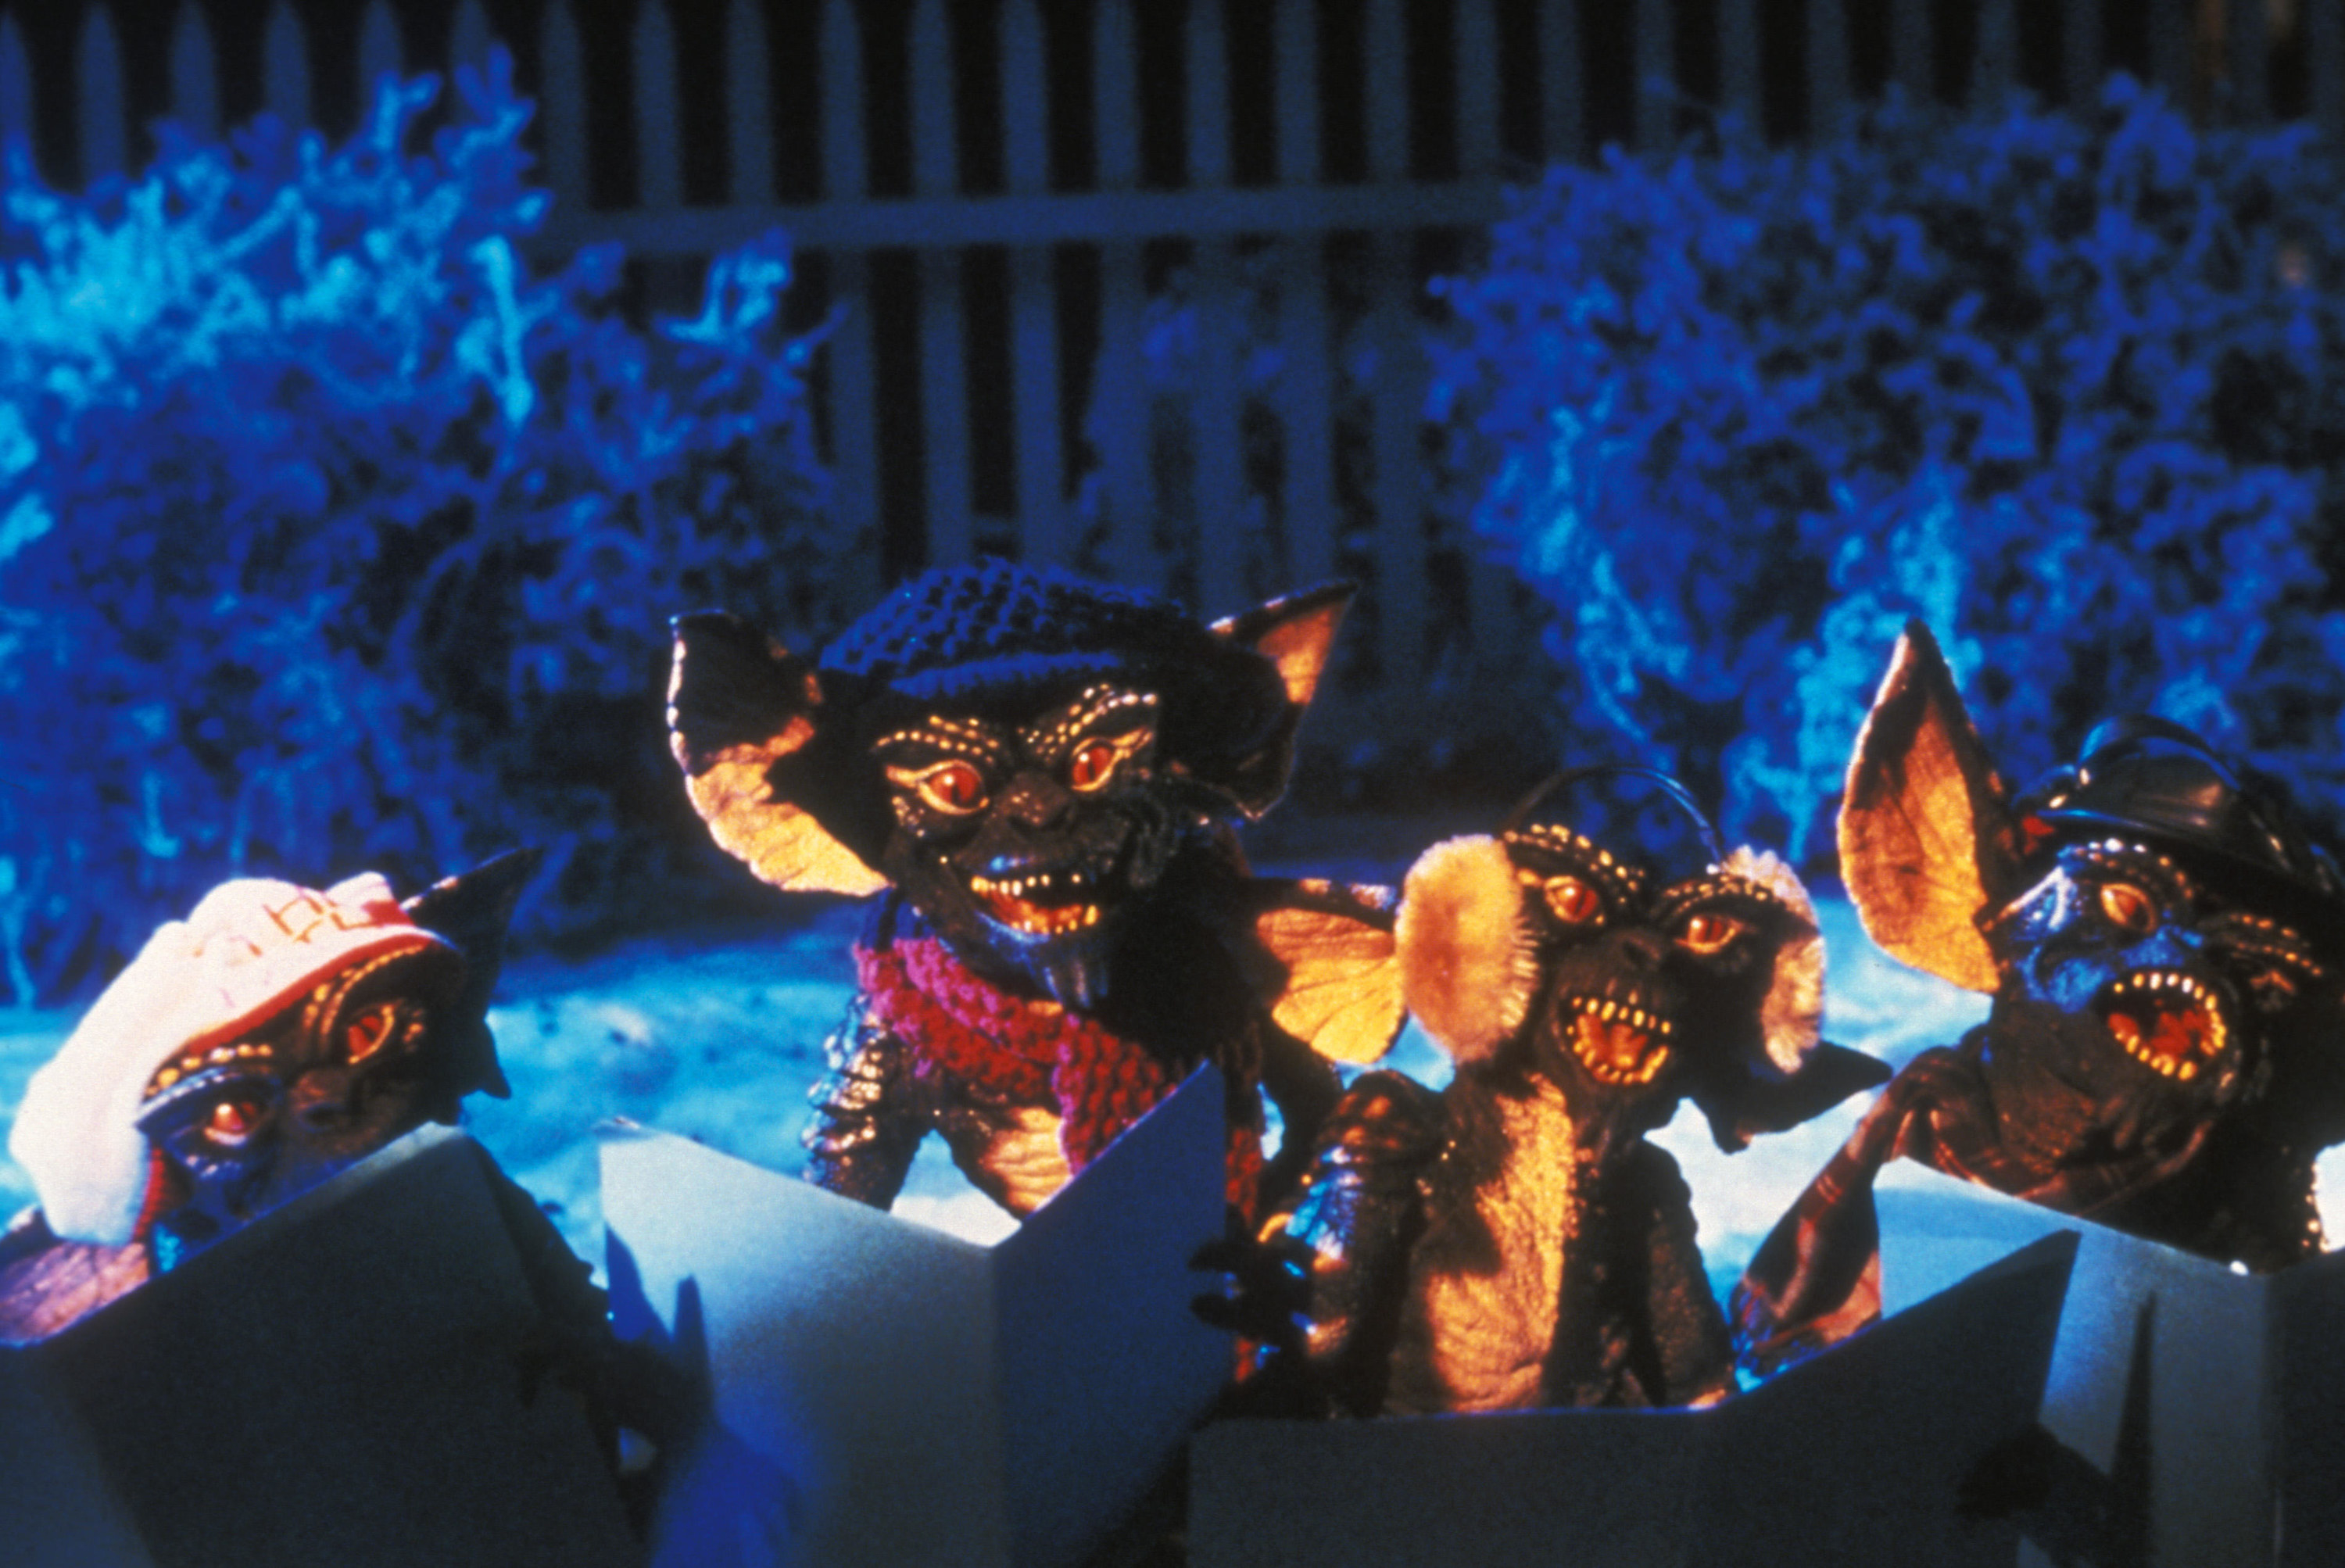 Four scaly gremlins sing Christmas Carols in the snow